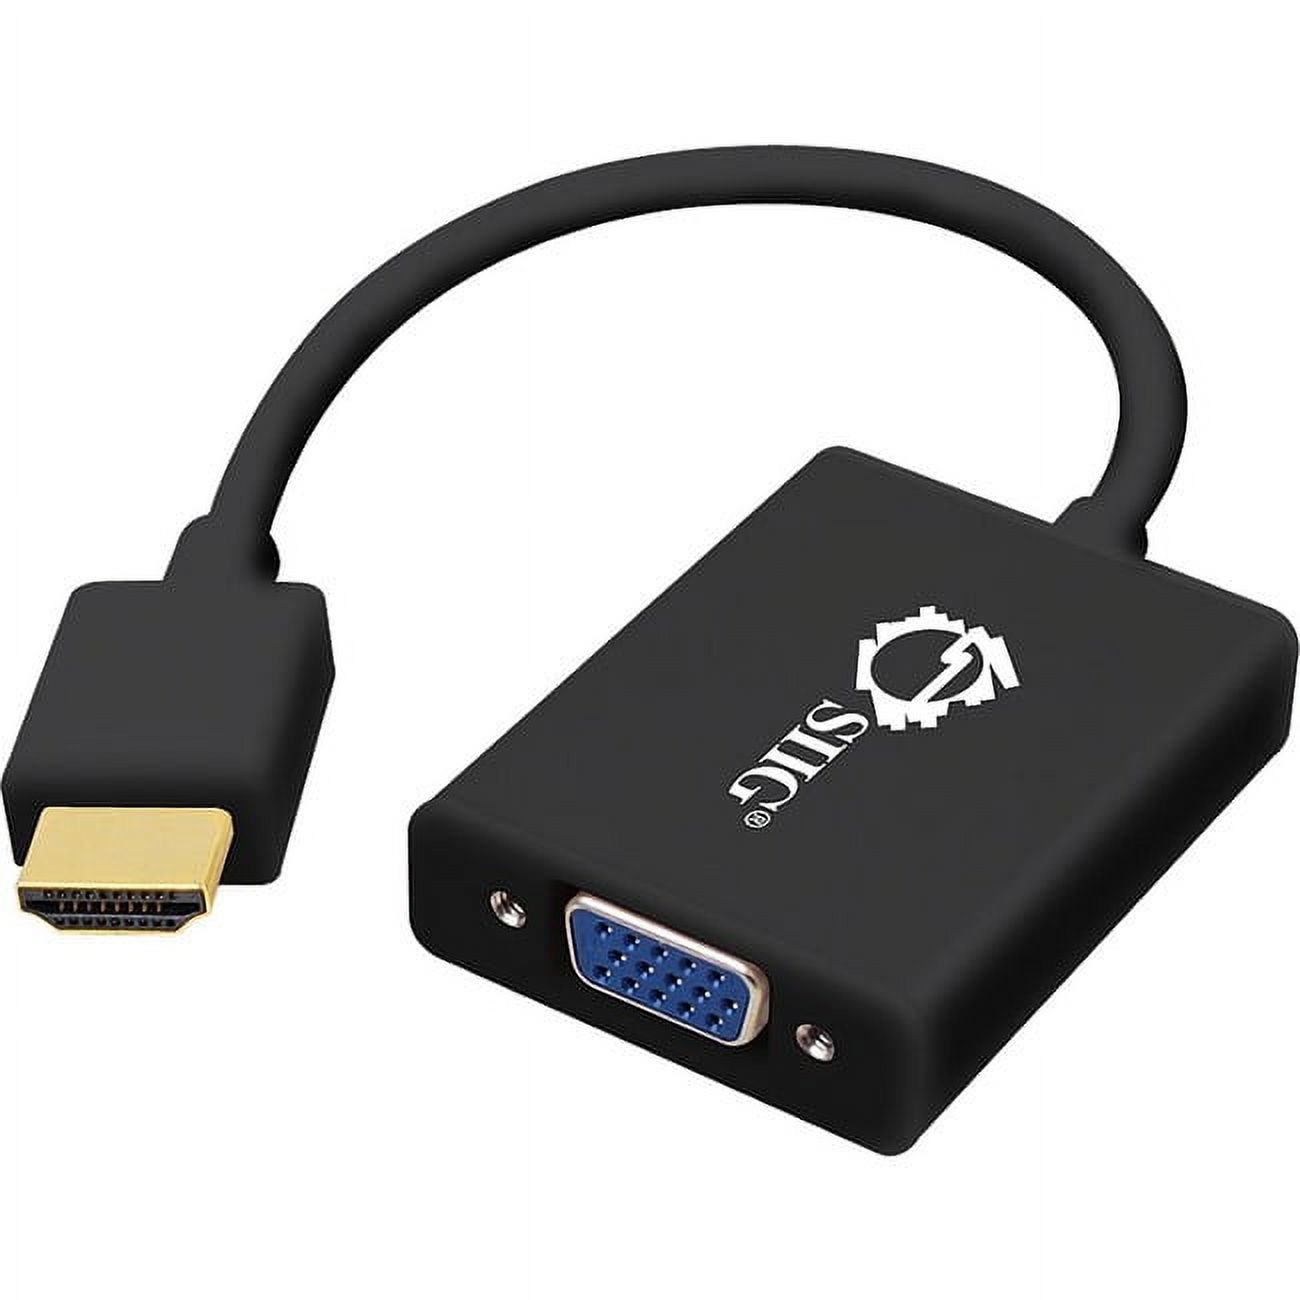 SIIG Aluminum HDMI to VGA Adapter Converter with Audio - image 1 of 3